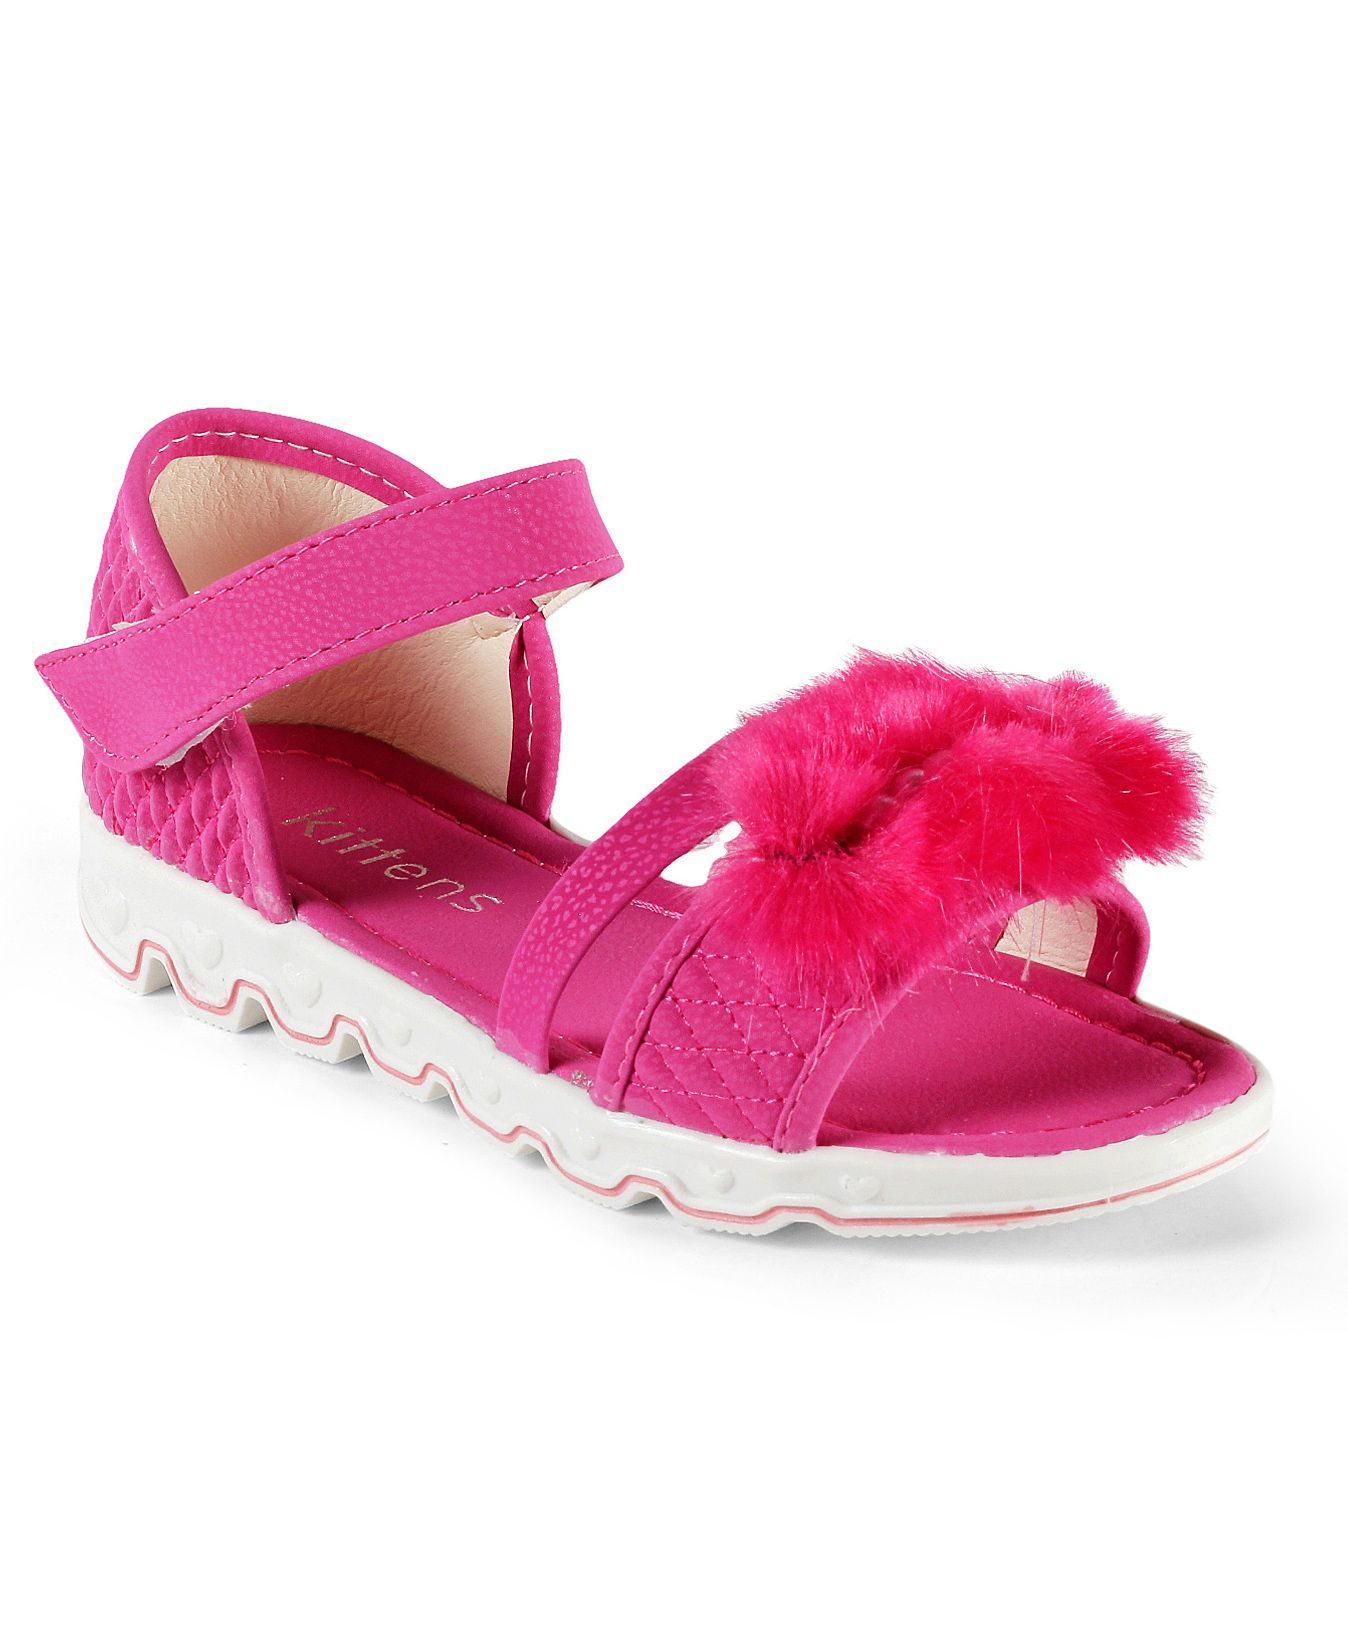 kittens shoes online